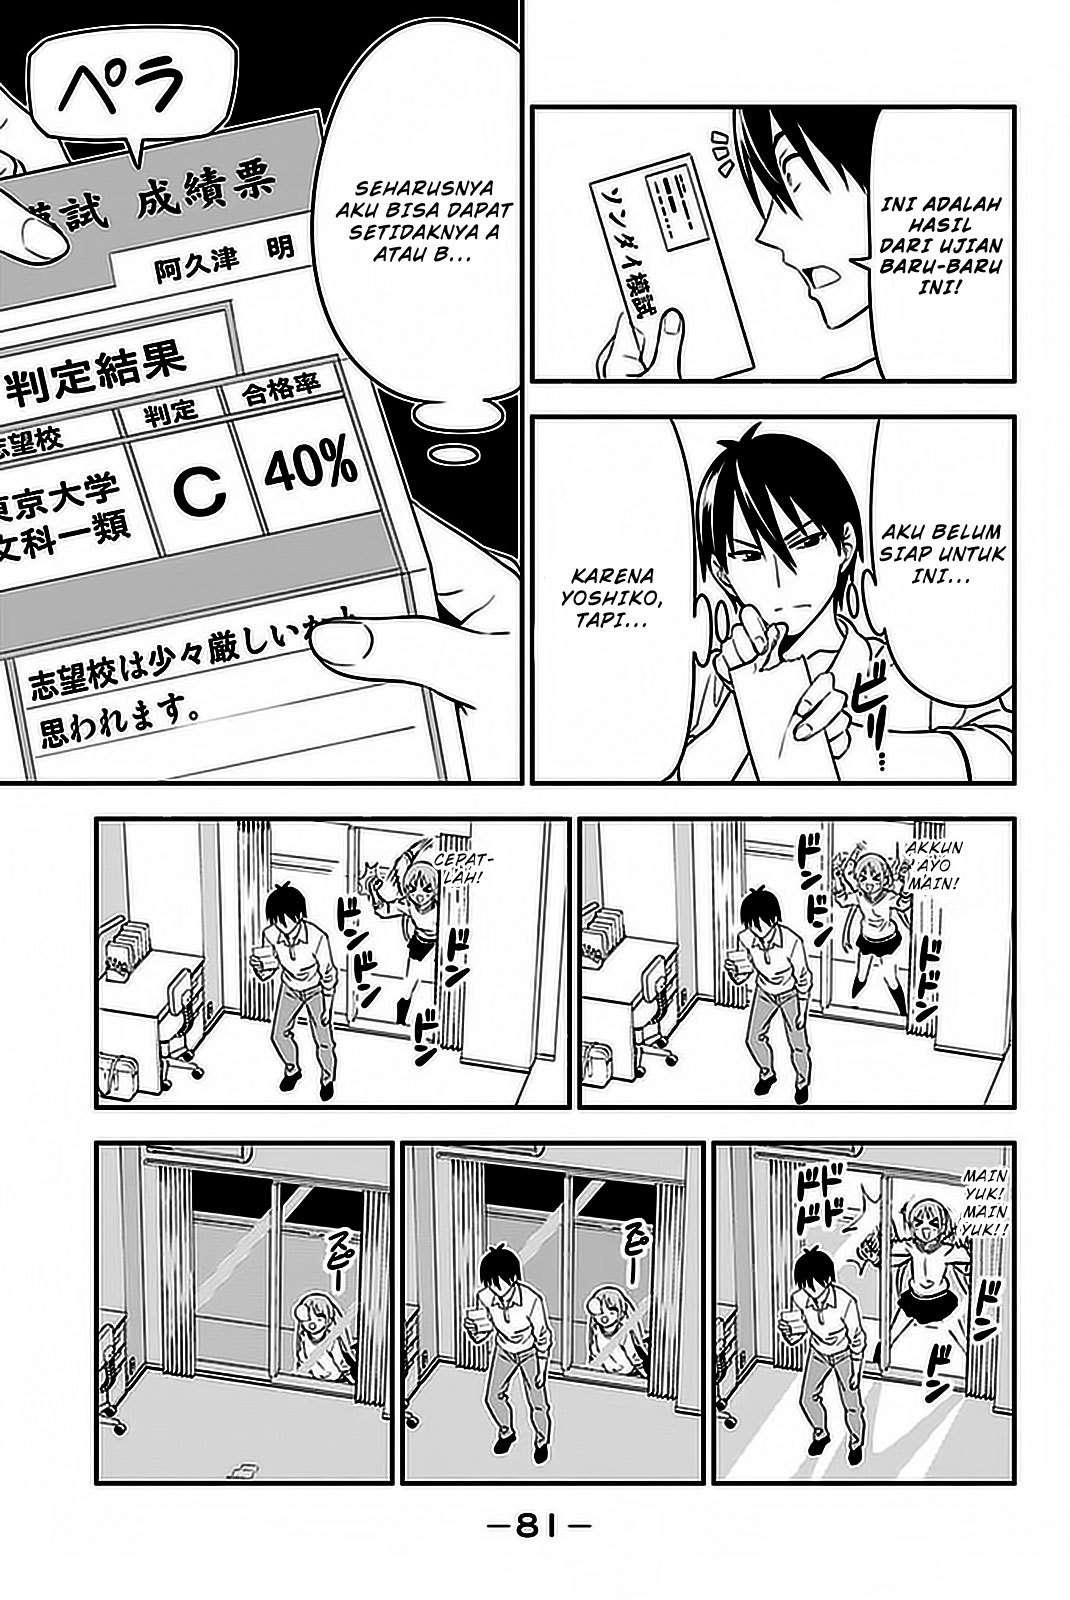 Aho Girl Chapter 102 11